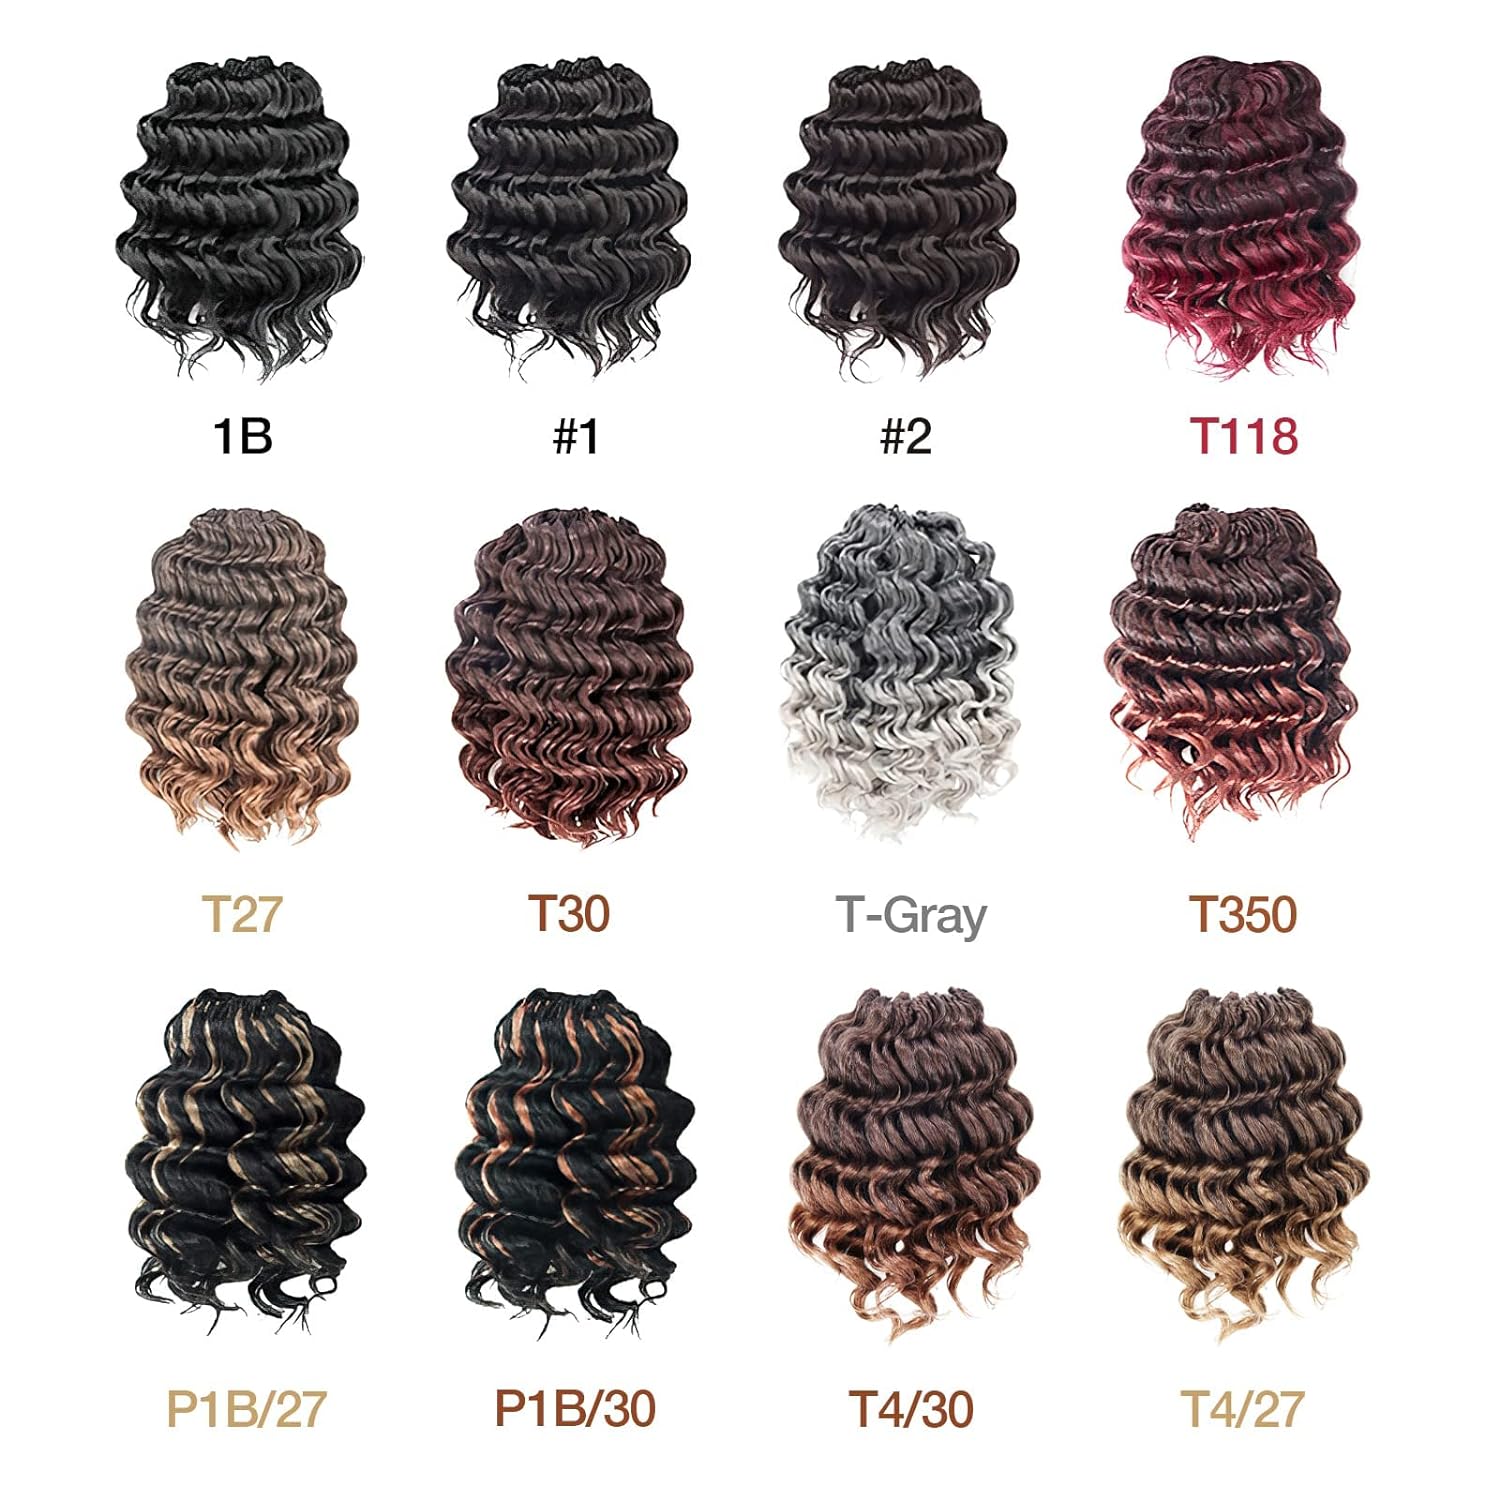 FAST SHIPPING 3-5 DAY OC | Toyotress Ocean Wave Crochet Hair - 8 Packs Short Curly Water Wave Deep Twist Wavy Braids For Black Women Synthetic Braiding Hair Extensions